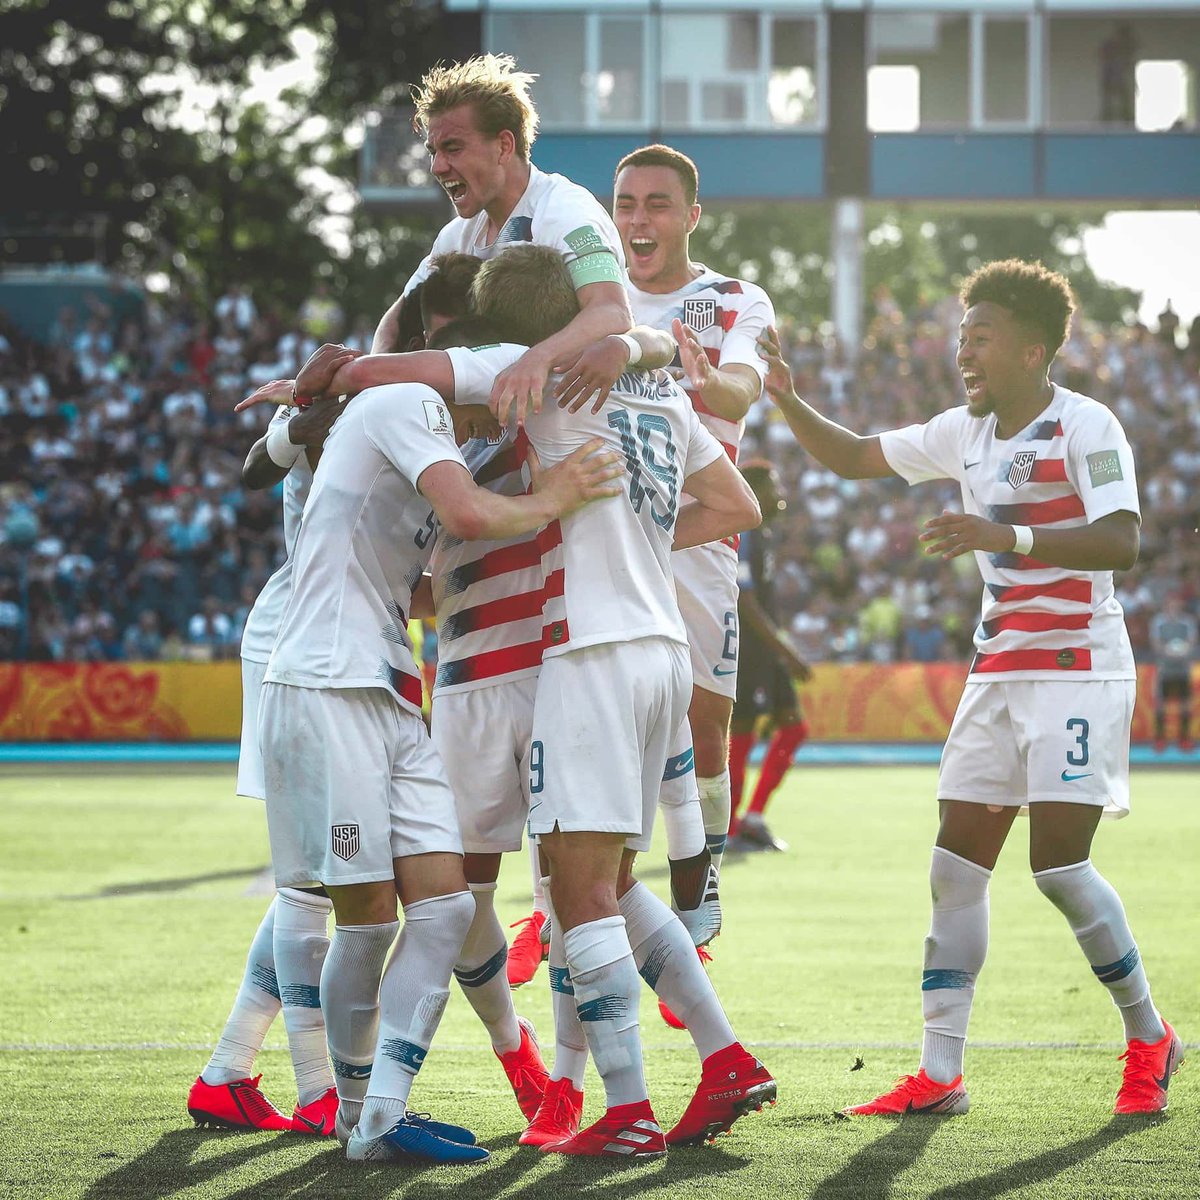  #OTD A year ago,  #USYNT played their first match of the 2019 FIFA U-20 World Cup.Where are they now?Sergiño Dest, RB/LB (2000) - promotion to the first Ajax team, he debuted in Eredivisie and Champions League; recently linked with Bayern Munich and FC Barcelona #USMNT 